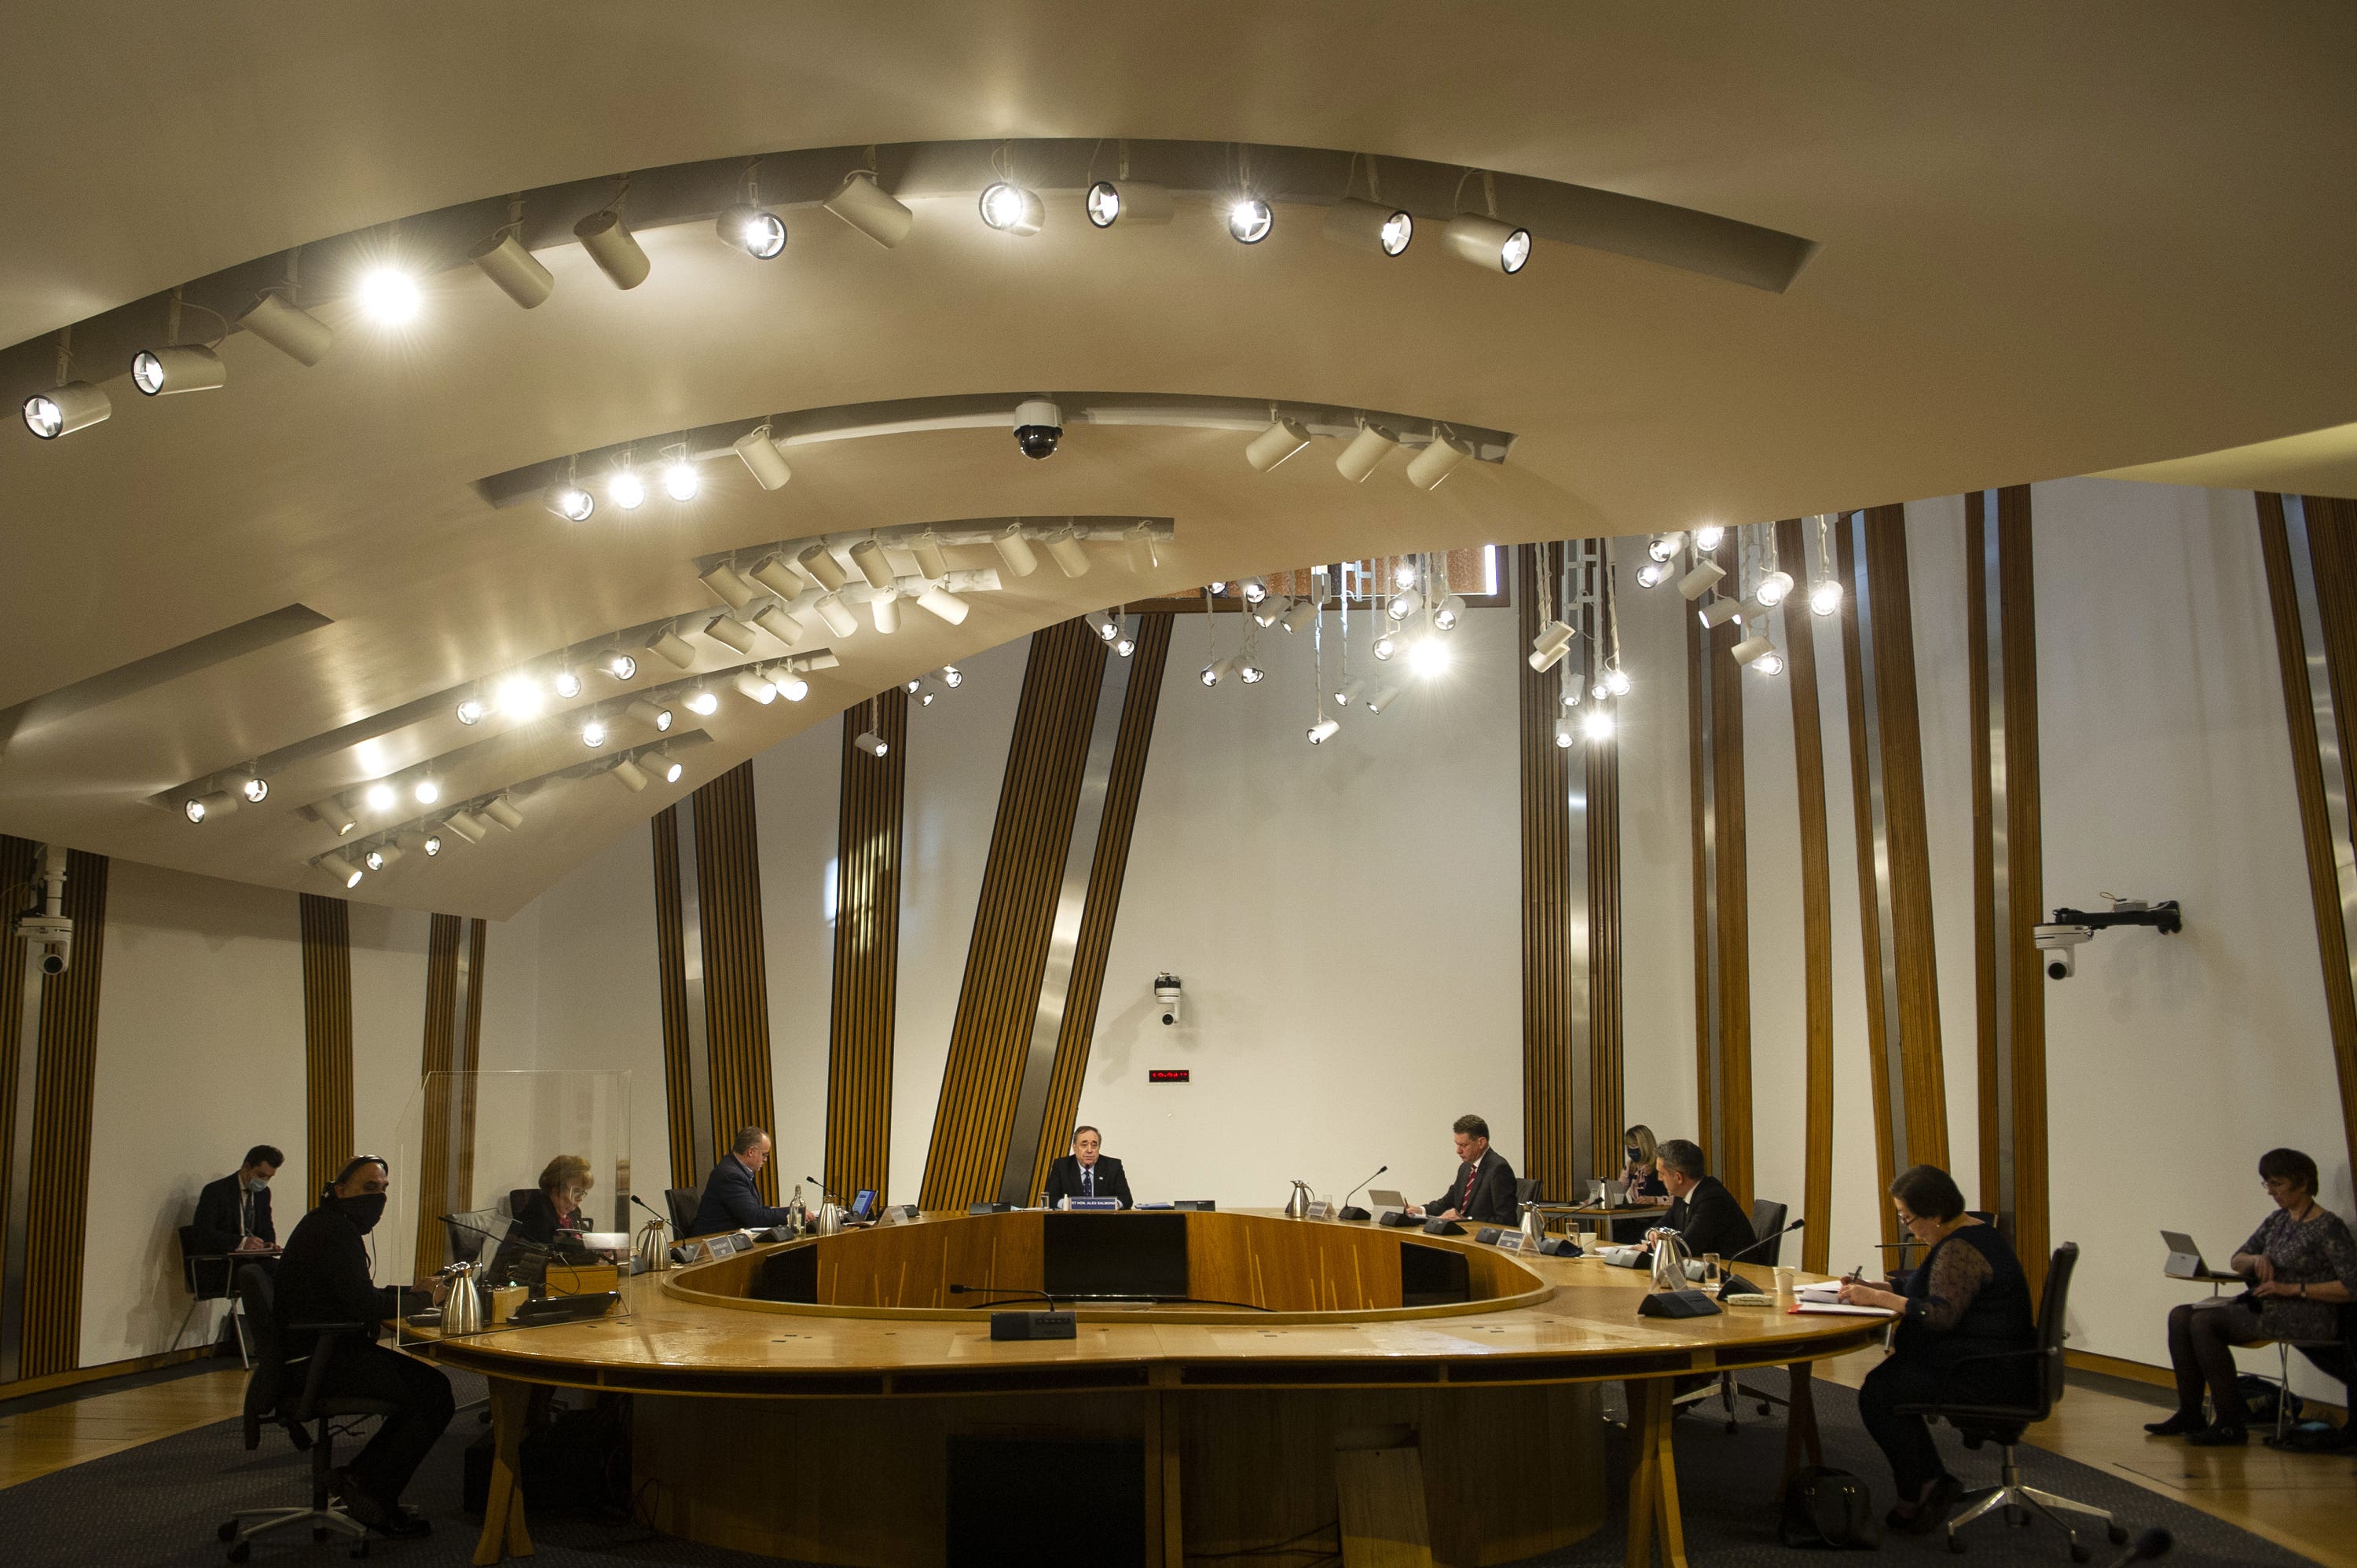 <em>Former first minister Alex Salmond (centre) giving evidence to the Holyrood committee last week (Andy Buchanan/PA)</em>”/><cite class=cite>PA Wire</cite></div><figcaption aria-hidden=true><em>Former first minister Alex Salmond (centre) giving evidence to the Holyrood committee last week (Andy Buchanan/PA)</em> <cite class=hidden>PA Wire</cite></figcaption></figure><p>In his opening remarks, Mr Wolffe rejected criticism of the Crown Office and denied any political influence relating to Salmond’s criminal prosecution, which ultimately saw him acquitted of 13 charges at Edinburgh’s High Court last March.</p><p>Mr Wolffe said: “Any suggestion, from any quarter, that the Crown’s decision-making has at any time been influenced by irrelevant considerations or improper motivations would be wholly without foundation.</p><p>“Insinuation and assertions to the contrary are baseless.”</p><p>He then acknowledged that the Crown Office had been criticised for “actions it has taken to protect the identity of the complainers” after its intervention that led to parliament censoring Salmond’s evidence after it was already in the public domain.</p><p>Mr Wolffe said the crown had been contacted by lawyers acting for one of Salmond’s complainants expressing concern about the publication of evidence.</p><p>“The crown considers that where a potential contempt is drawn to its attention, it has a responsibility to seek to ensure the court orders of this sort – made to protect the administration of justice and the interests of complainers – are observed by drawing that issue to the attention of the publisher,” he told MSPs.</p><p>He added: “The crown drew those concerns to the attention of the parliamentary authorities, the parliamentary authorities took a decision, and it was a matter for them to redact certain material.”</p><div class=